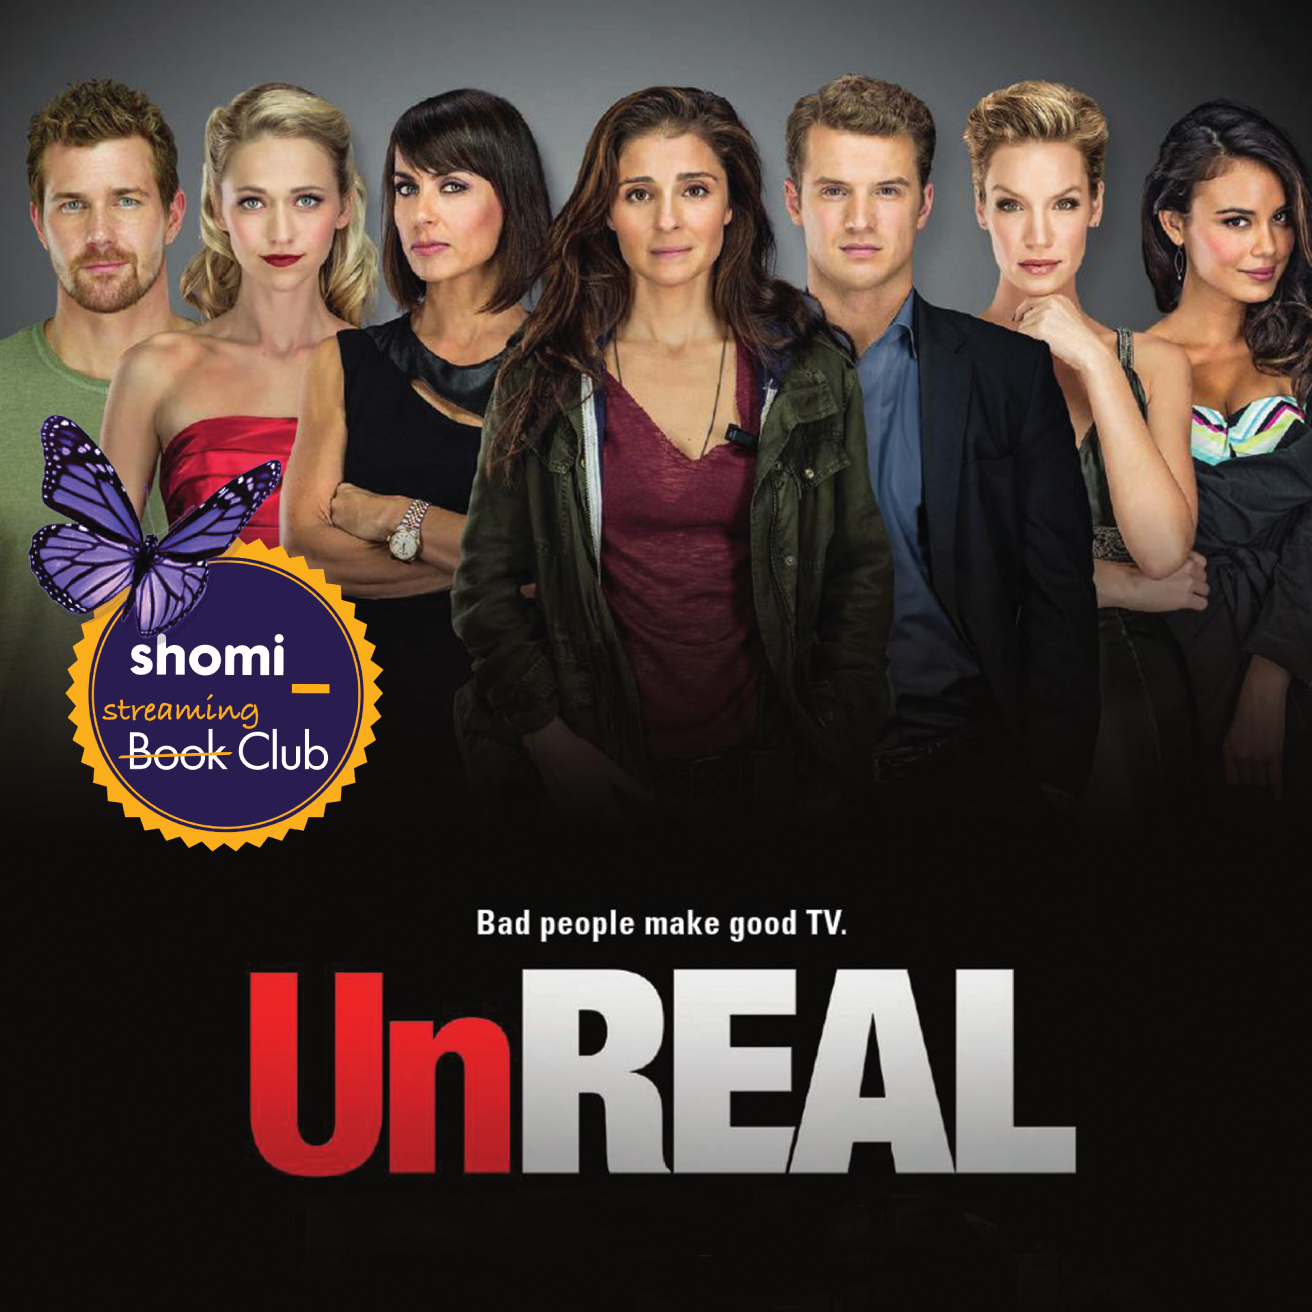 Join shomi’s Streaming Club and Enjoy the Shows of the Summer